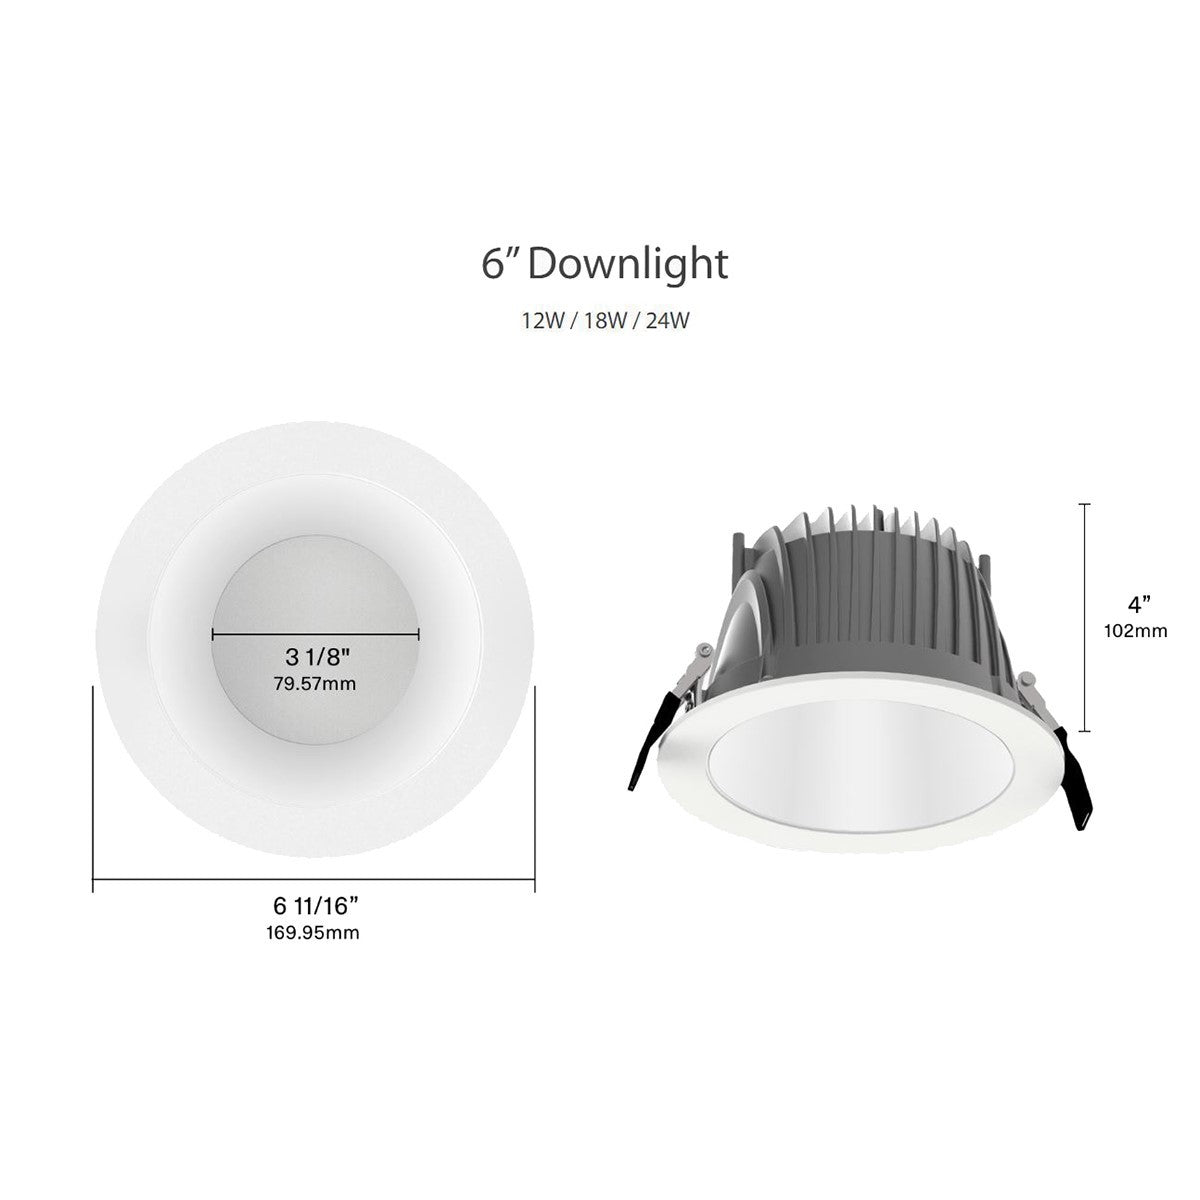 6 Inch LED Deep Regress Commercial Downlight, Field Adjustable 12/18/24W, 1000/1500/2000 Lumens, 30/35/40/50K, Smooth Trim, White Finish